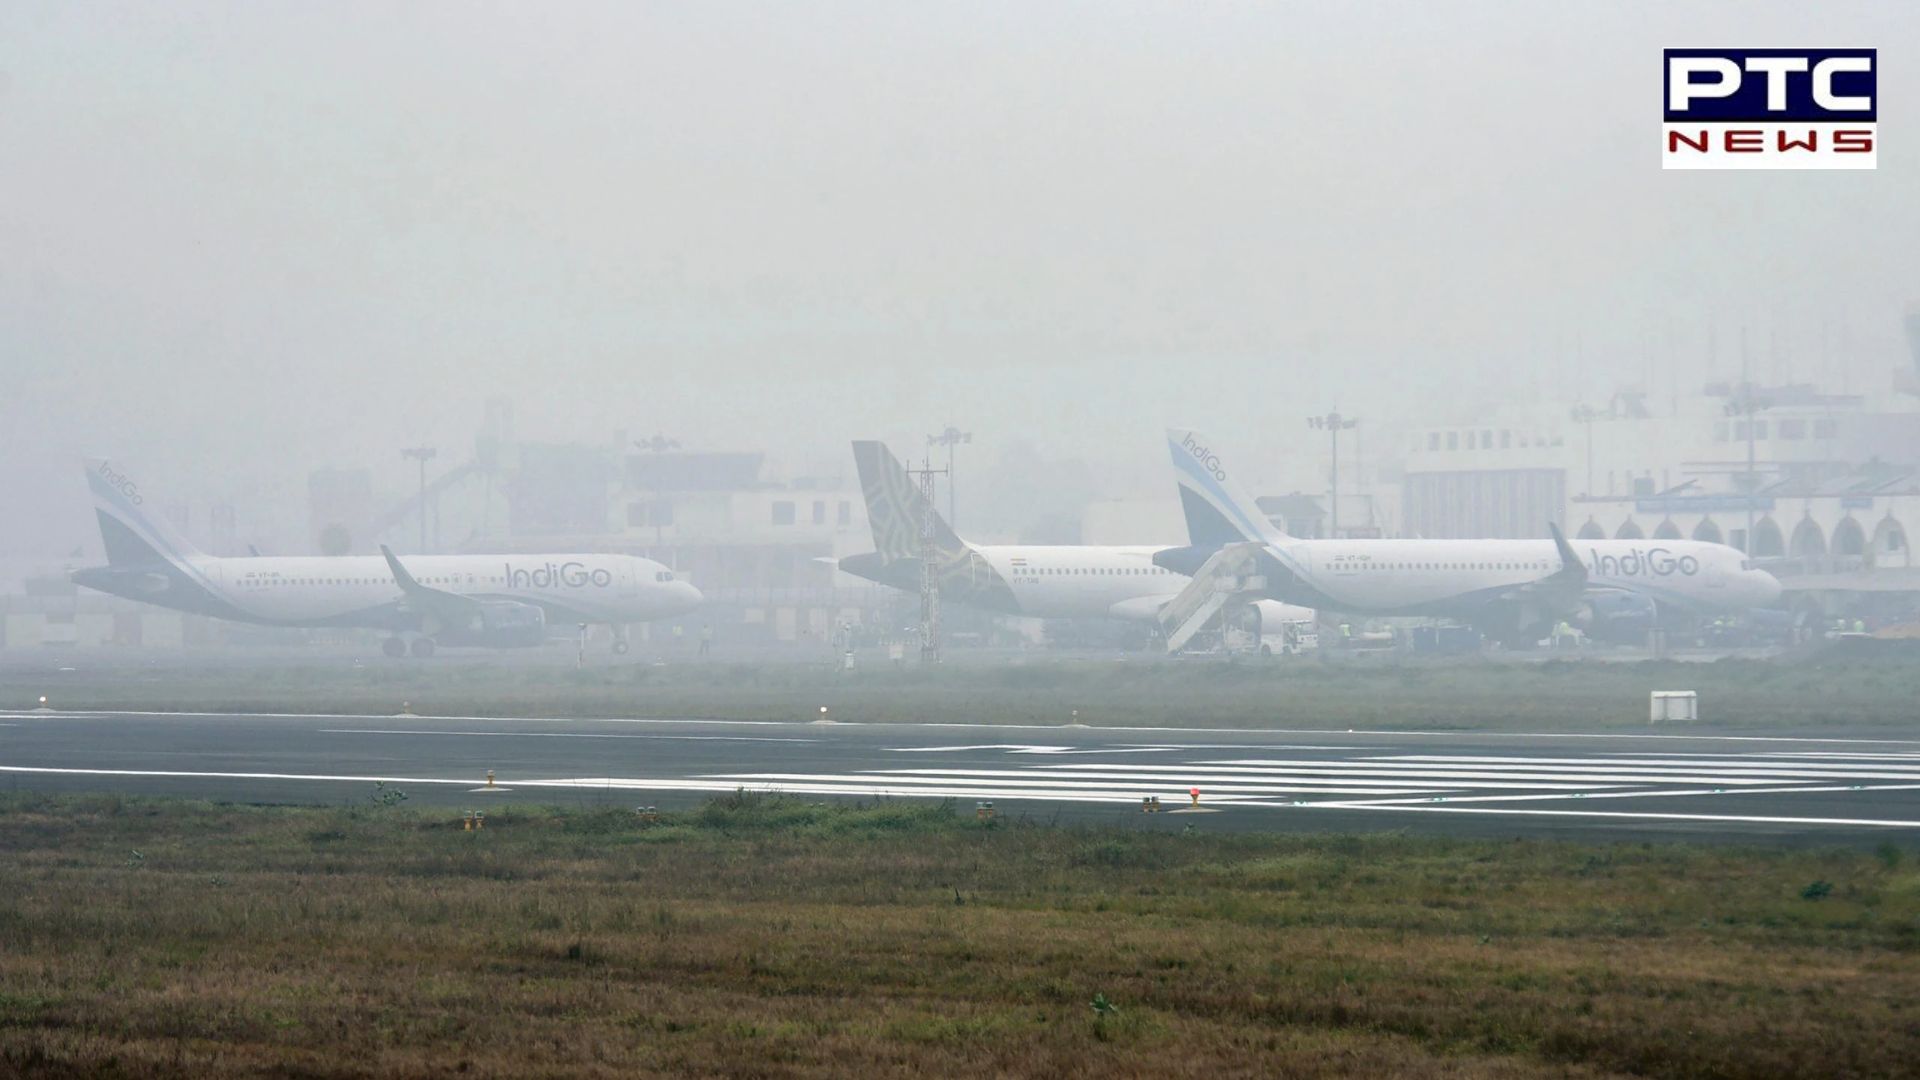 Airport havoc: 300 flights cancelled, 40,000 passengers affected